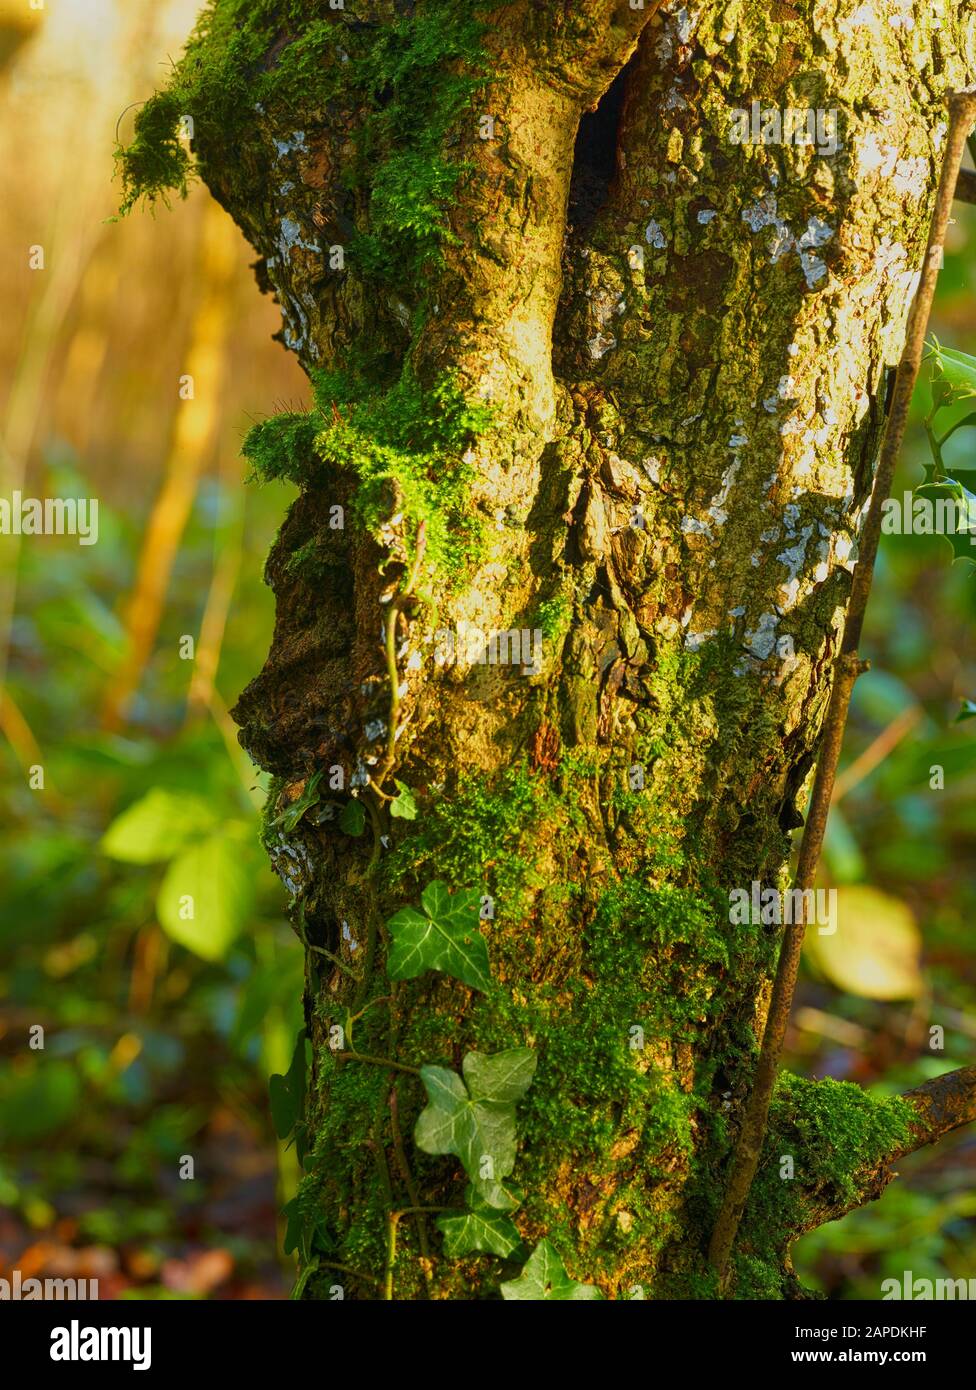 Gnarled tree stump nature abstract close-up with moss and ivy in Surrey woodland, England, United Kingdom, Europe Stock Photo